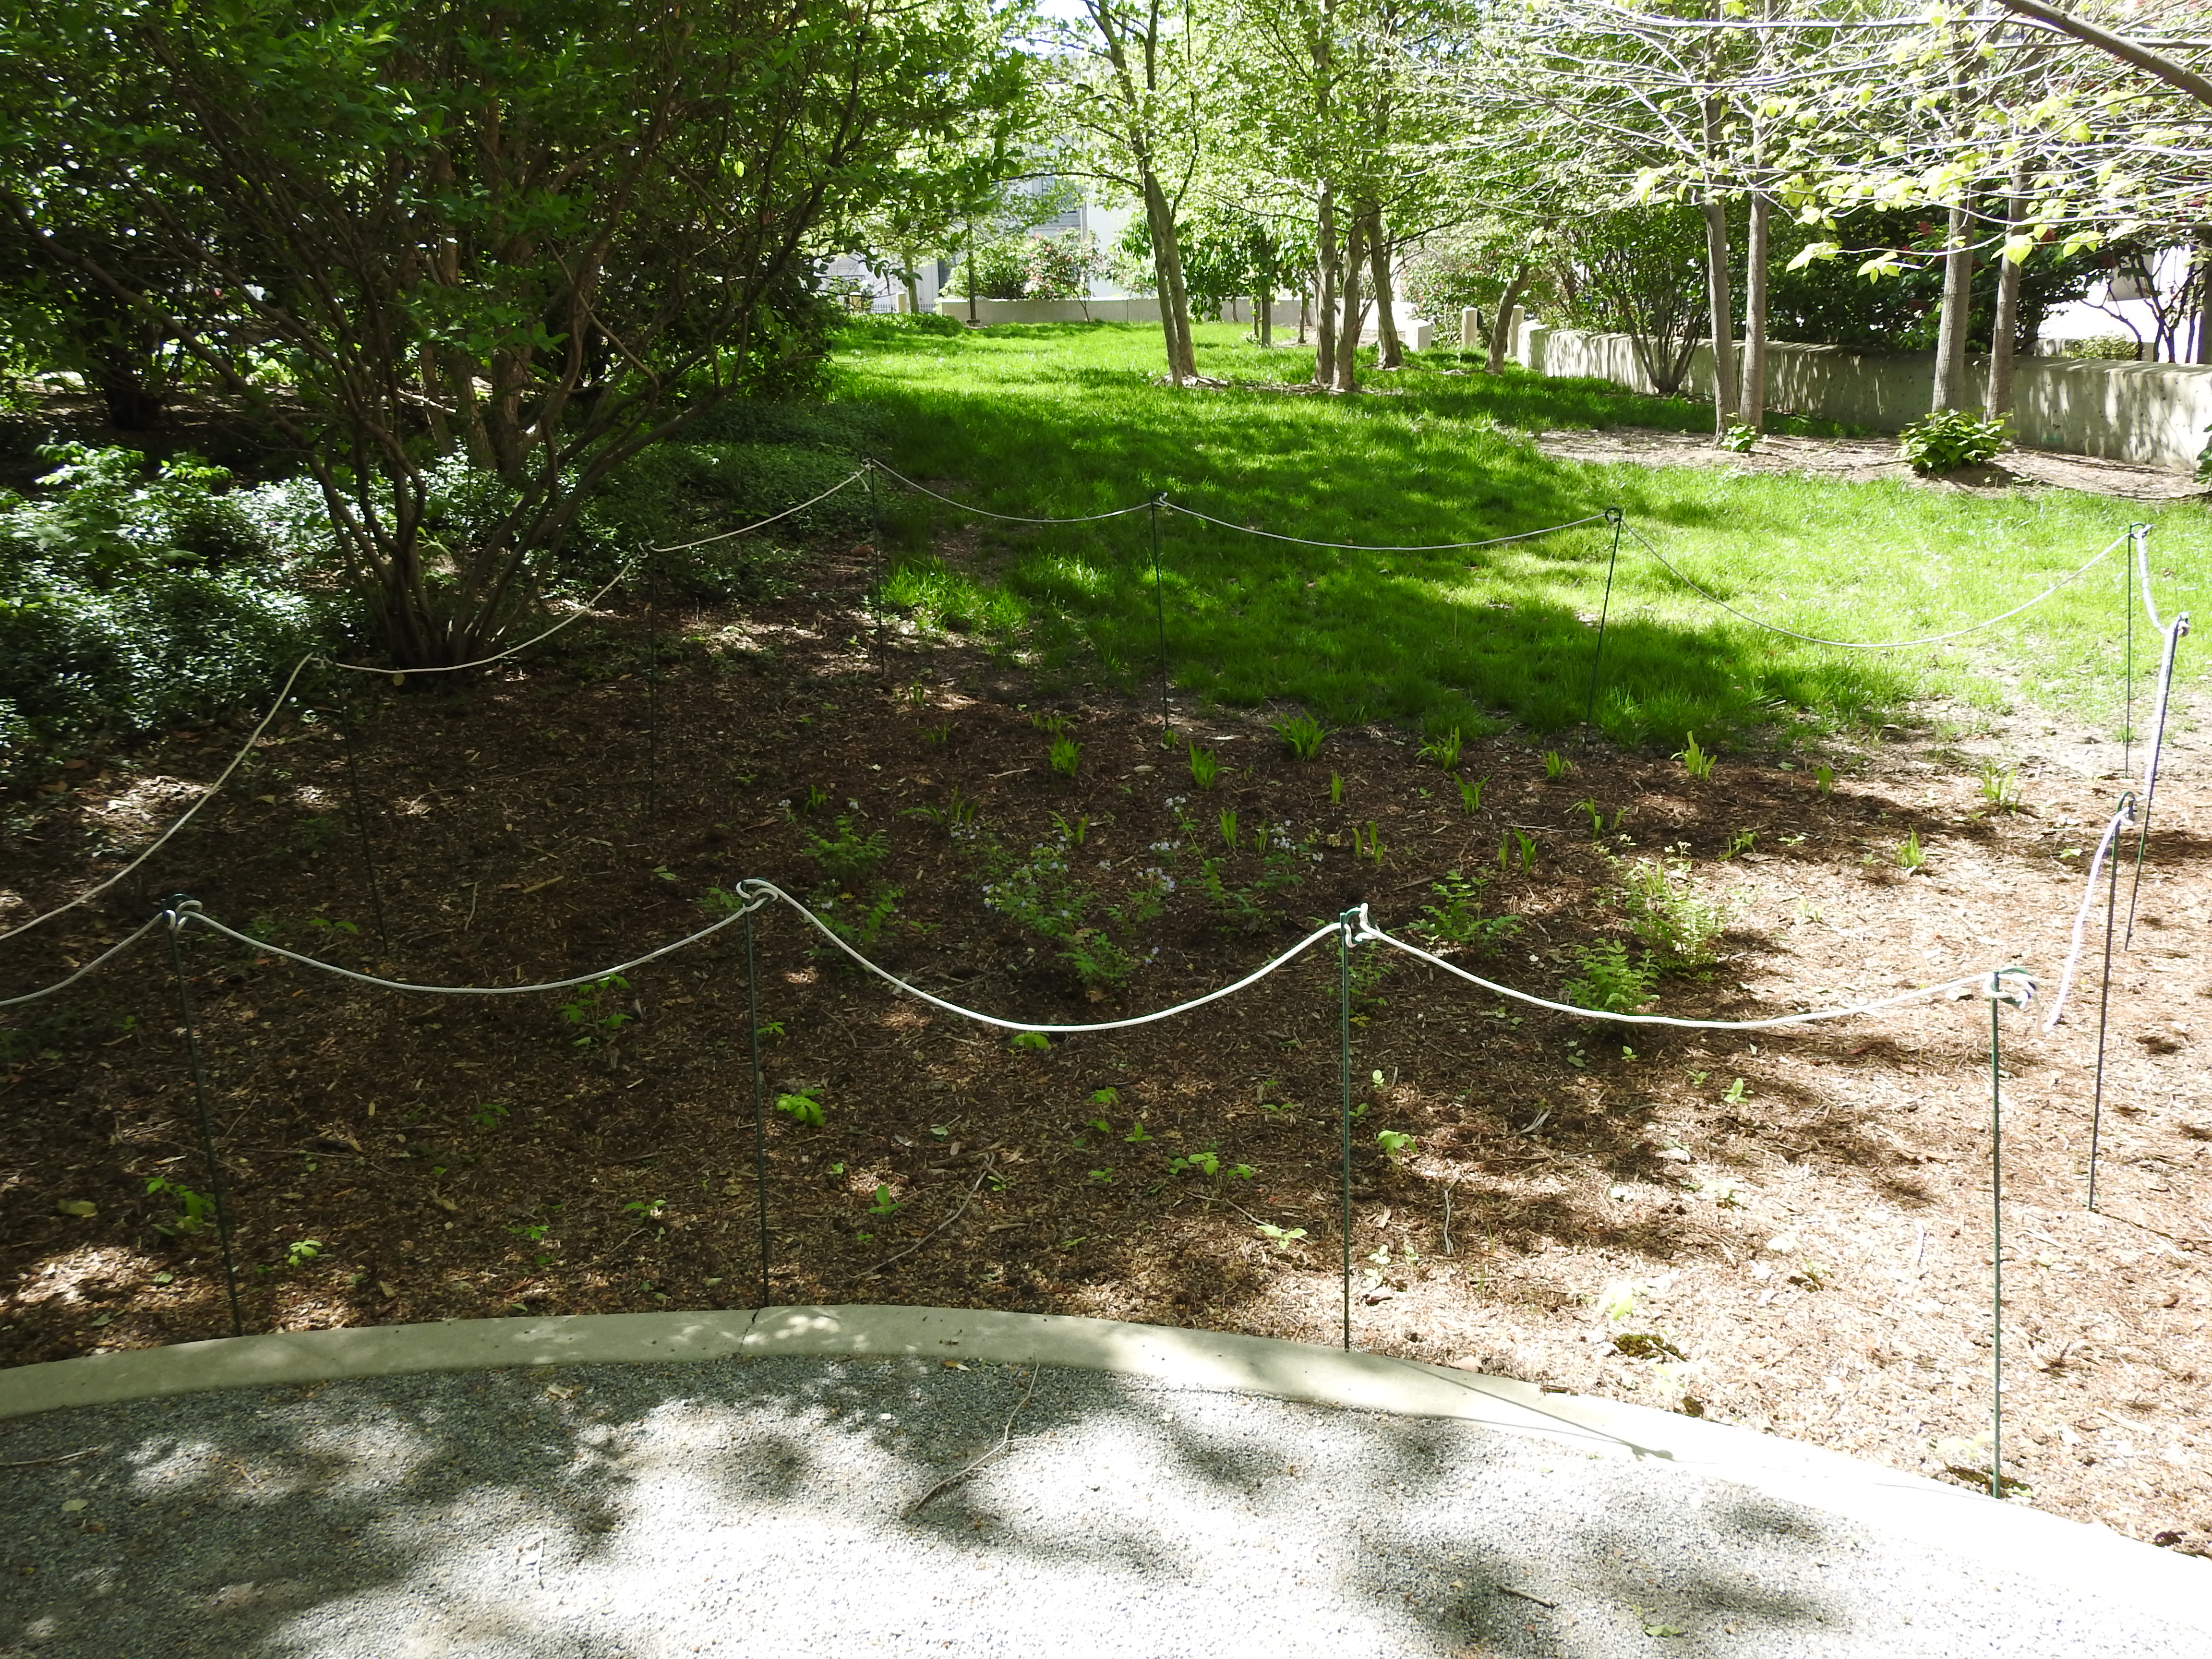 A white rope closes off a cleared area in a garden. Pavement is in the foreground